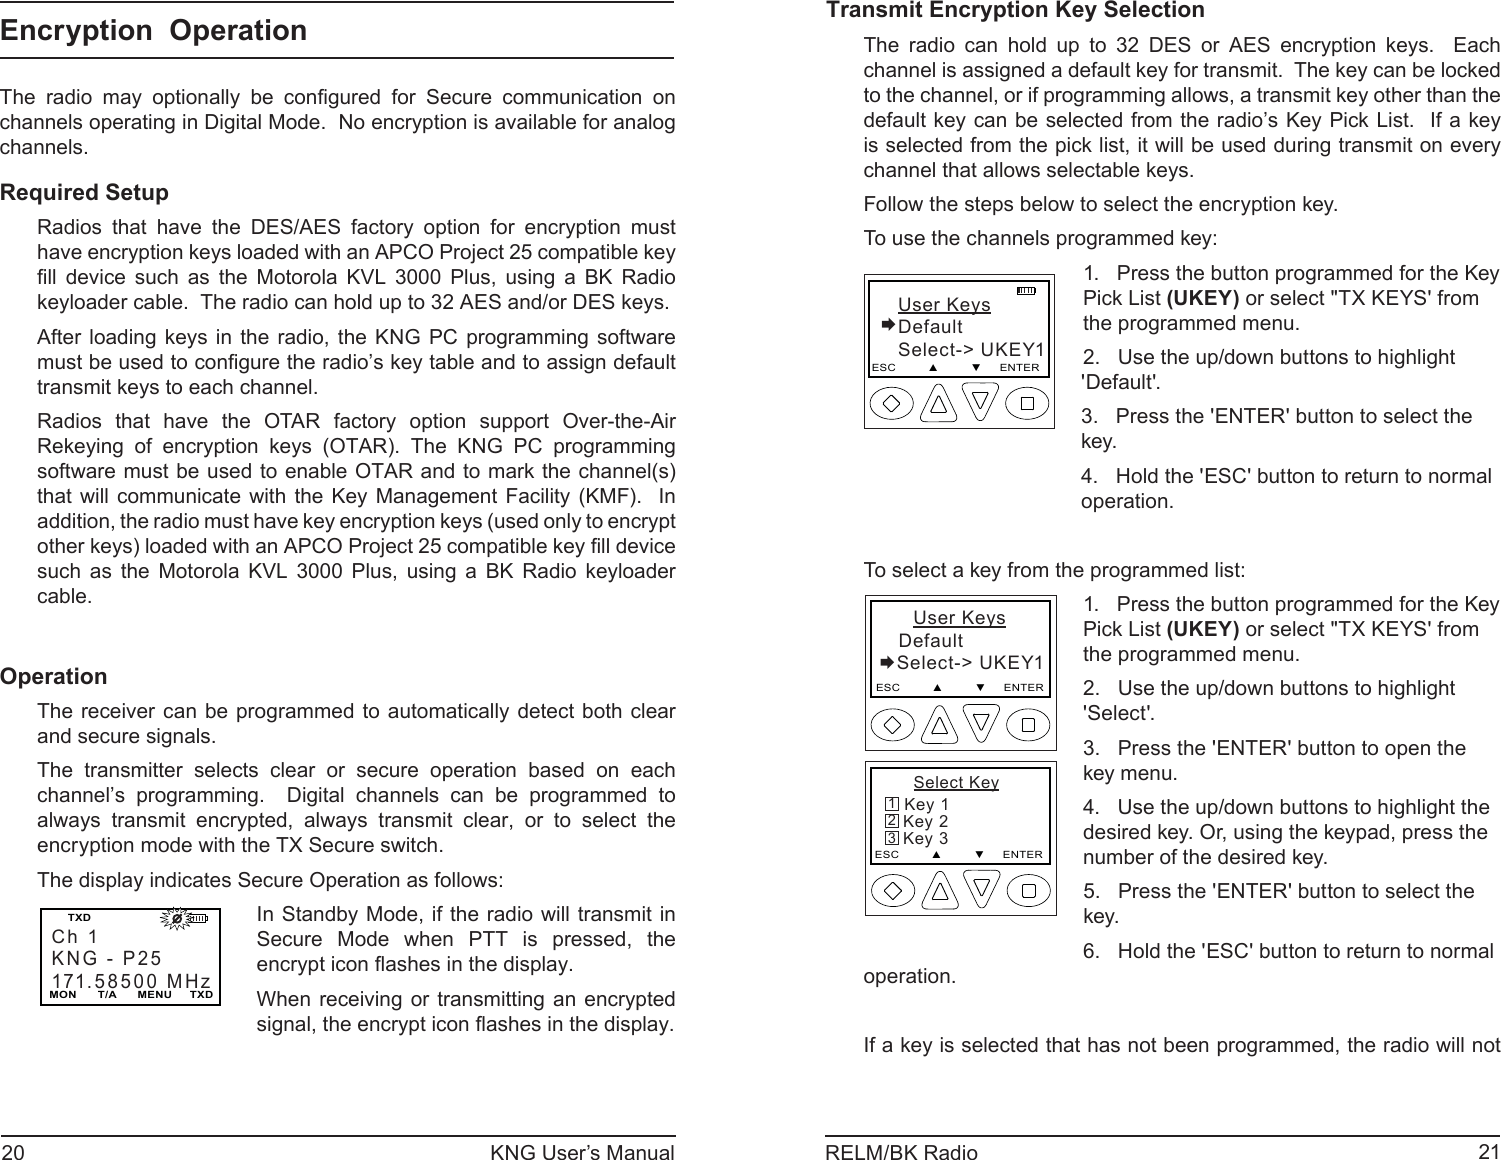 20 KNG User’s Manual 21RELM/BK RadioTransmit Encryption Key SelectionThe radio can hold up to 32 DES or AES encryption keys.  Each channel is assigned a default key for transmit.  The key can be locked to the channel, or if programming allows, a transmit key other than the default key can be selected from the radio’s Key Pick List.  If a key is selected from the pick list, it will be used during transmit on every channel that allows selectable keys.Follow the steps below to select the encryption key.To use the channels programmed key:   User KeysDefault   Select-&gt; UKEY1ESC         ▲         ▼     ENTER1.   Press the button programmed for the Key Pick List (UKEY) or select &quot;TX KEYS&apos; from the programmed menu.2.   Use the up/down buttons to highlight &apos;Default&apos;.3.   Press the &apos;ENTER&apos; button to select the key.4.   Hold the &apos;ESC&apos; button to return to normal operation.To select a key from the programmed list:     User Keys DefaultSelect-&gt; UKEY1ESC         ▲         ▼     ENTER     Select Key Key 1   Key 2   Key 3ESC         ▲         ▼     ENTER3211.   Press the button programmed for the Key Pick List (UKEY) or select &quot;TX KEYS&apos; from the programmed menu.2.   Use the up/down buttons to highlight &apos;Select&apos;.3.   Press the &apos;ENTER&apos; button to open the key menu.4.   Use the up/down buttons to highlight the desired key. Or, using the keypad, press the number of the desired key. 5.   Press the &apos;ENTER&apos; button to select the key.6.   Hold the &apos;ESC&apos; button to return to normal operation.If a key is selected that has not been programmed, the radio will not Encryption  OperationThe radio may optionally be conﬁ gured for Secure communication on channels operating in Digital Mode.  No encryption is available for analog channels.Required SetupRadios that have the DES/AES factory option for encryption must have encryption keys loaded with an APCO Project 25 compatible key ﬁ ll device such as the Motorola KVL 3000 Plus, using a BK Radio keyloader cable.  The radio can hold up to 32 AES and/or DES keys.After loading keys in the radio, the KNG PC programming software must be used to conﬁ gure the radio’s key table and to assign default transmit keys to each channel.Radios that have the OTAR factory option support Over-the-Air Rekeying of encryption keys (OTAR). The KNG PC programming software must be used to enable OTAR and to mark the channel(s) that will communicate with the Key Management Facility (KMF).  In addition, the radio must have key encryption keys (used only to encrypt other keys) loaded with an APCO Project 25 compatible key ﬁ ll device such as the Motorola KVL 3000 Plus, using a BK Radio keyloader cable.OperationThe receiver can be programmed to automatically detect both clear and secure signals.The transmitter selects clear or secure operation based on each channel’s programming.  Digital channels can be programmed to always transmit encrypted, always transmit clear, or to select the encryption mode with the TX Secure switch.The display indicates Secure Operation as follows:Ch 1KNG - P25171.58500 MHzMON      T/A      MENU     TXDTXD                       In Standby Mode, if the radio will transmit in Secure Mode when PTT is pressed, the encrypt icon ﬂ ashes in the display.When receiving or transmitting an encrypted signal, the encrypt icon ﬂ ashes in the display.